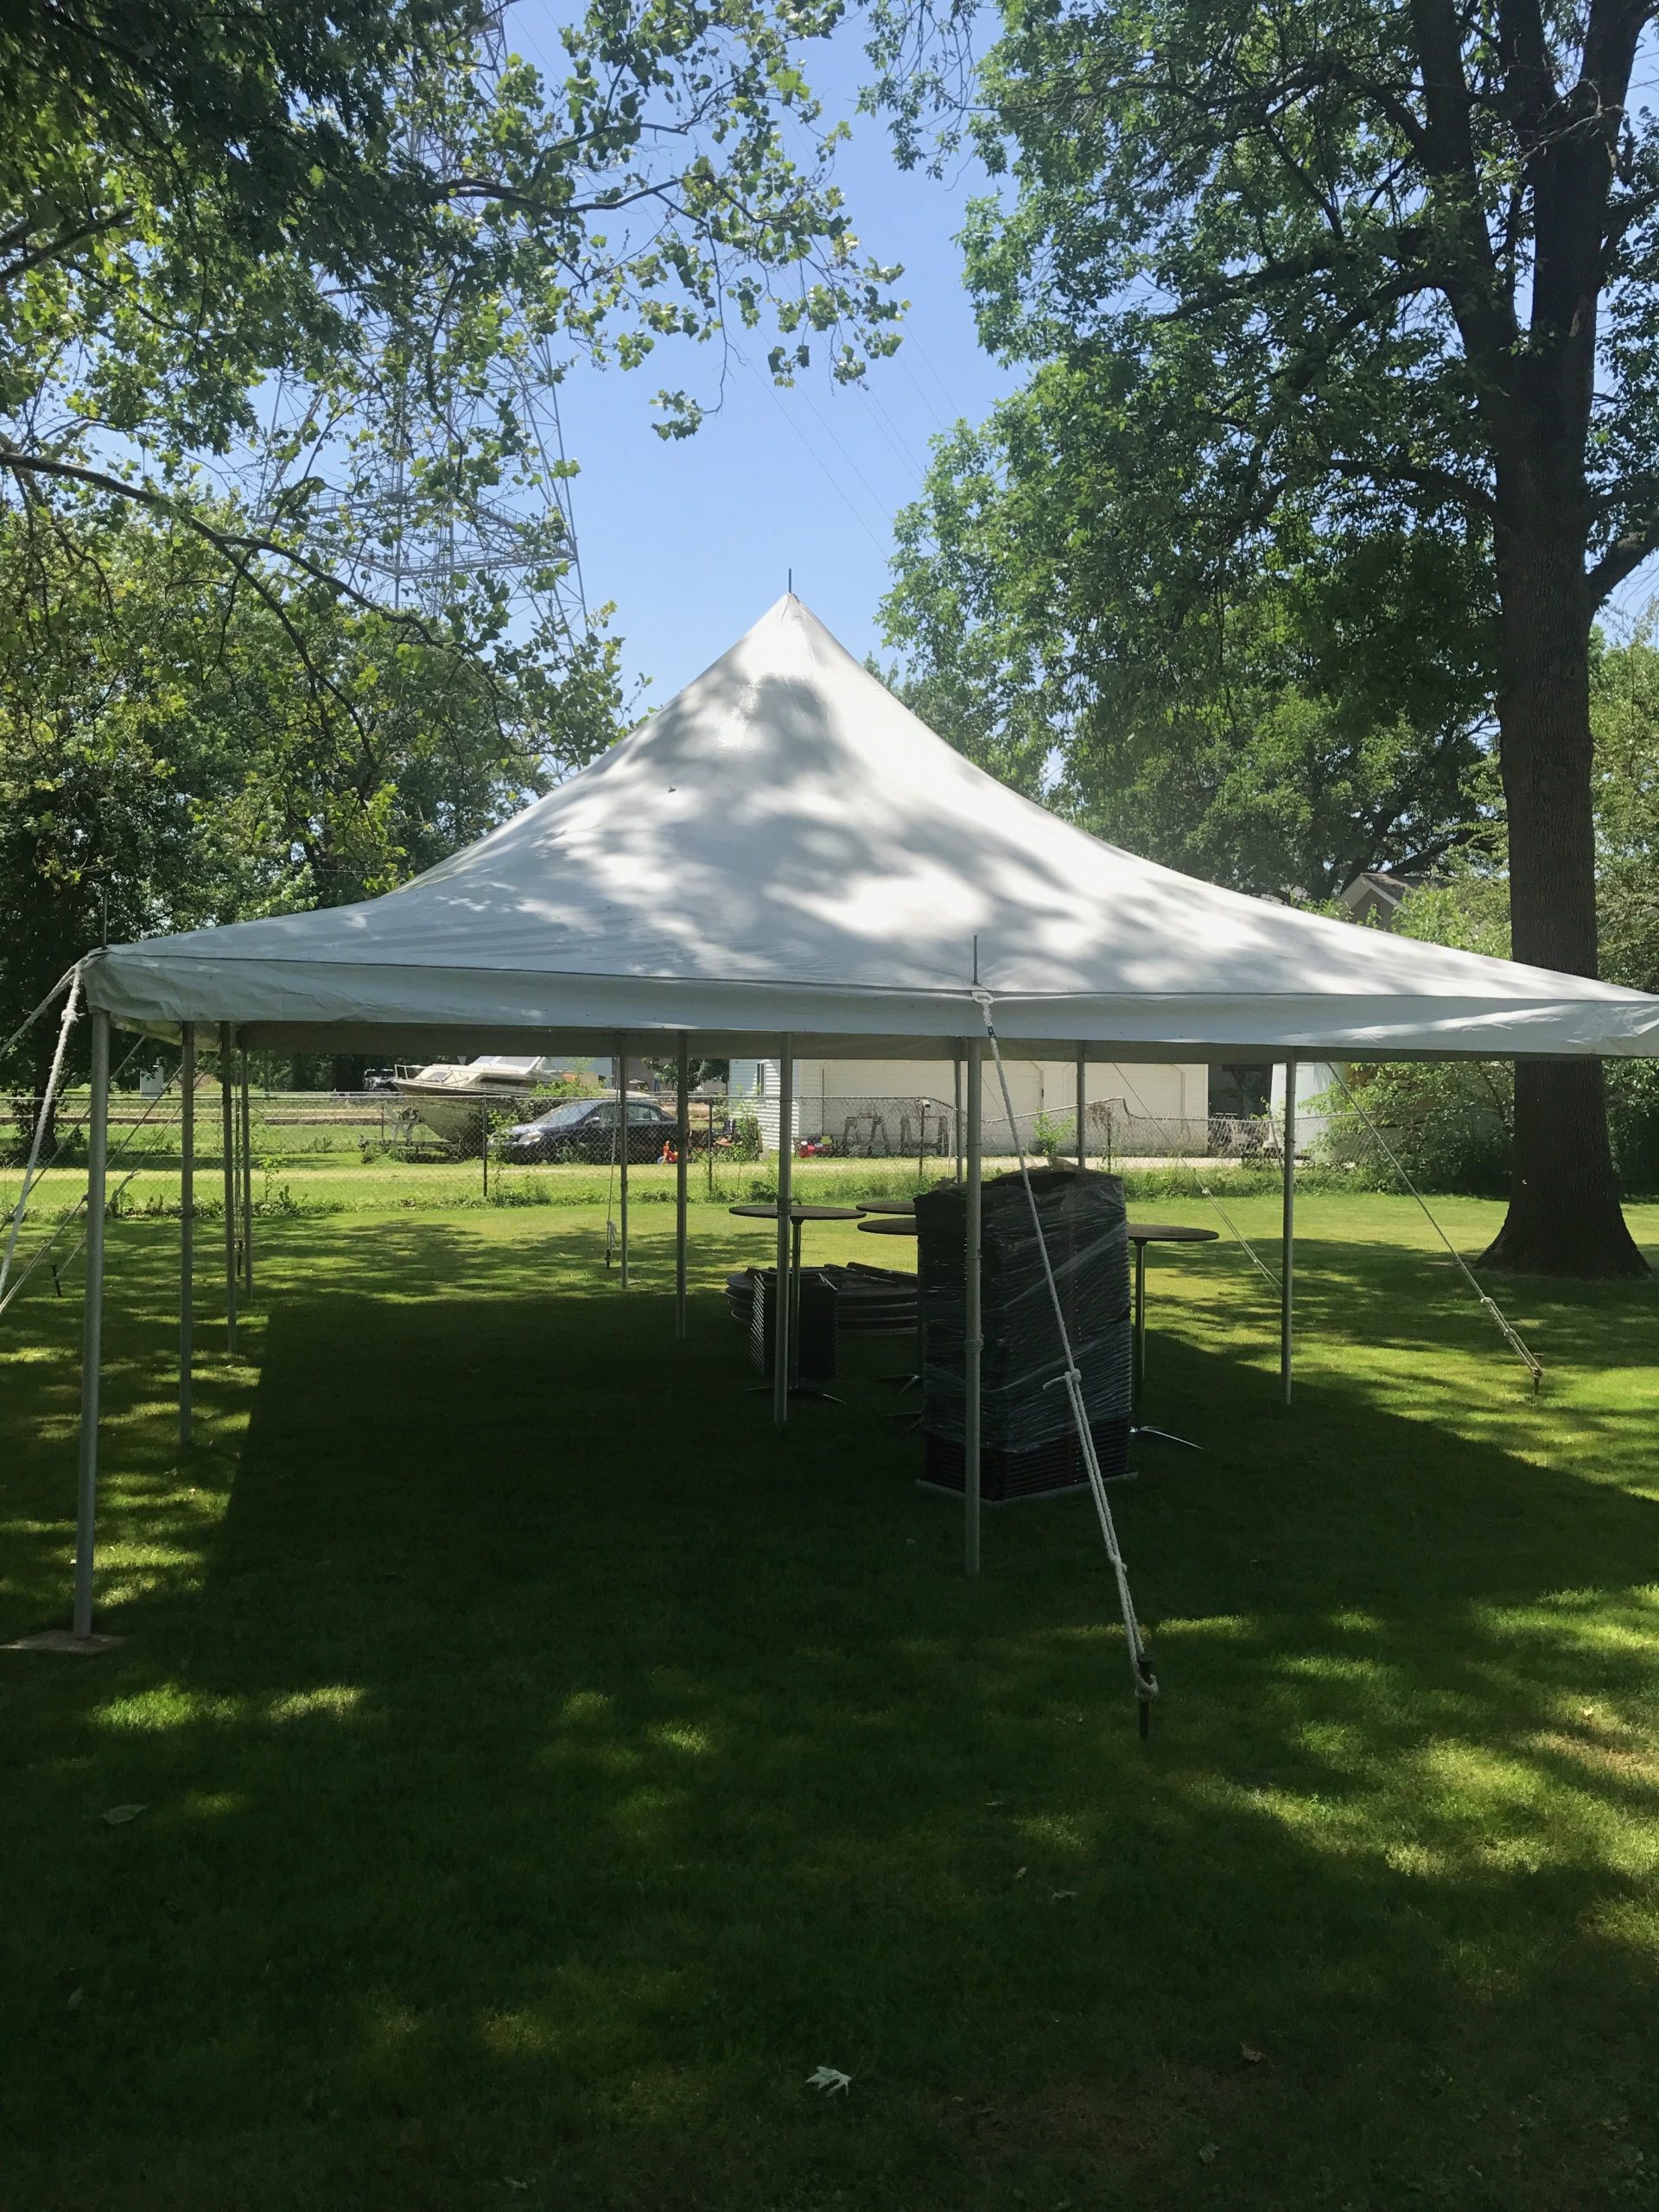 20' x 30' rope and pole tent for a Graduation party in East Moline, Illinois